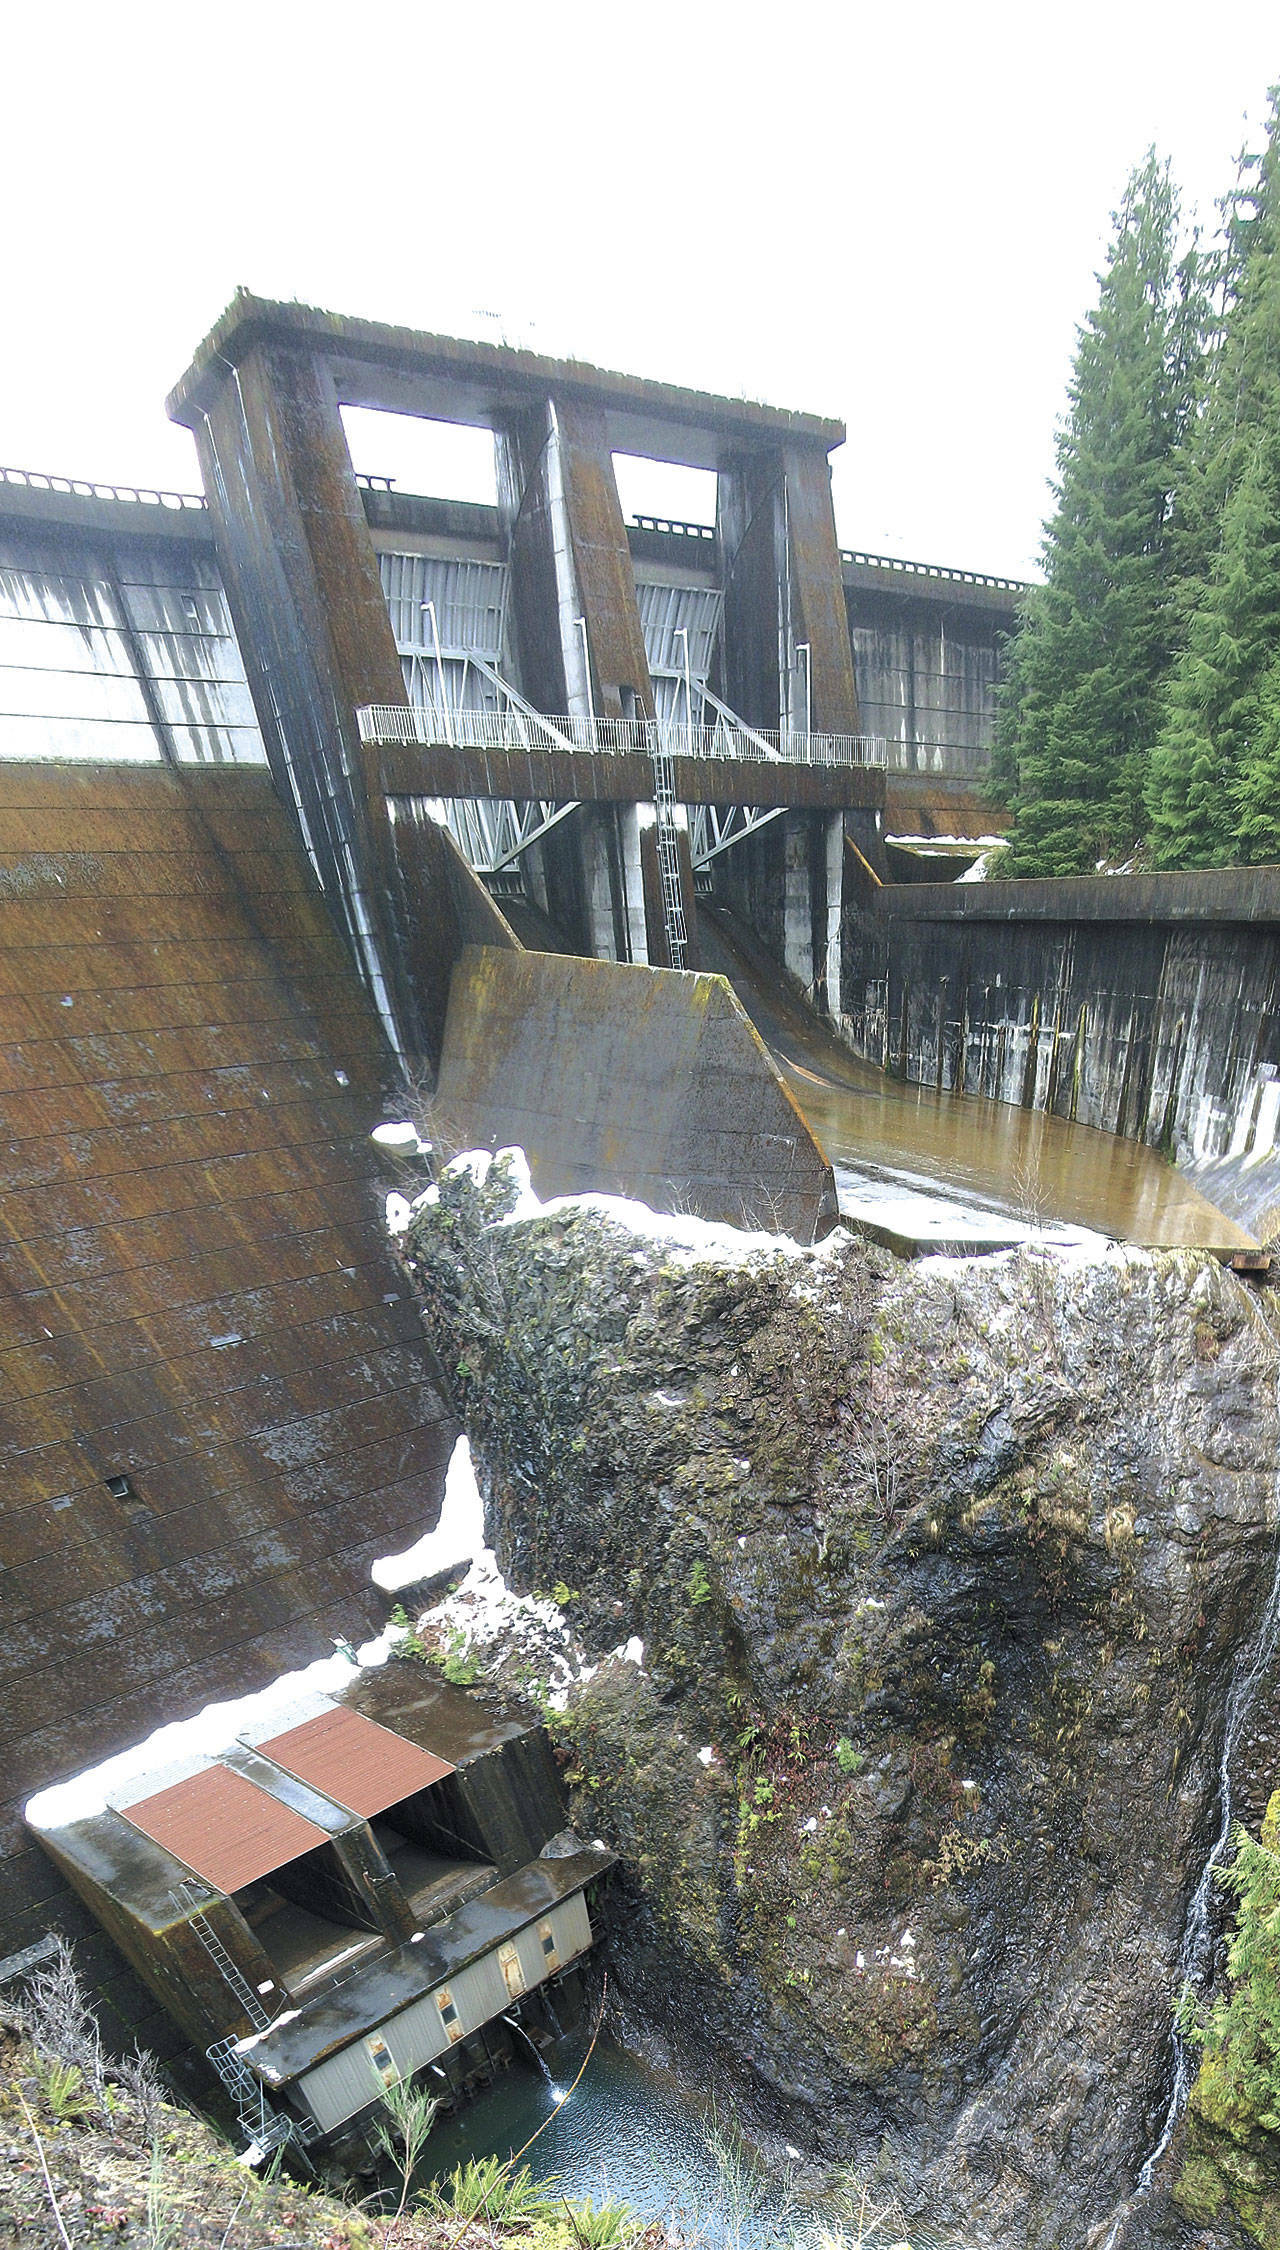 Grays Harbor Fire District 2, assisted by Thurston County's Special Operations Rescue Team, rescued a woman early Thursday morning after she fell 200 feet into a ravine near the Wynoochee Dam, pictured. (The Daily World file photo)